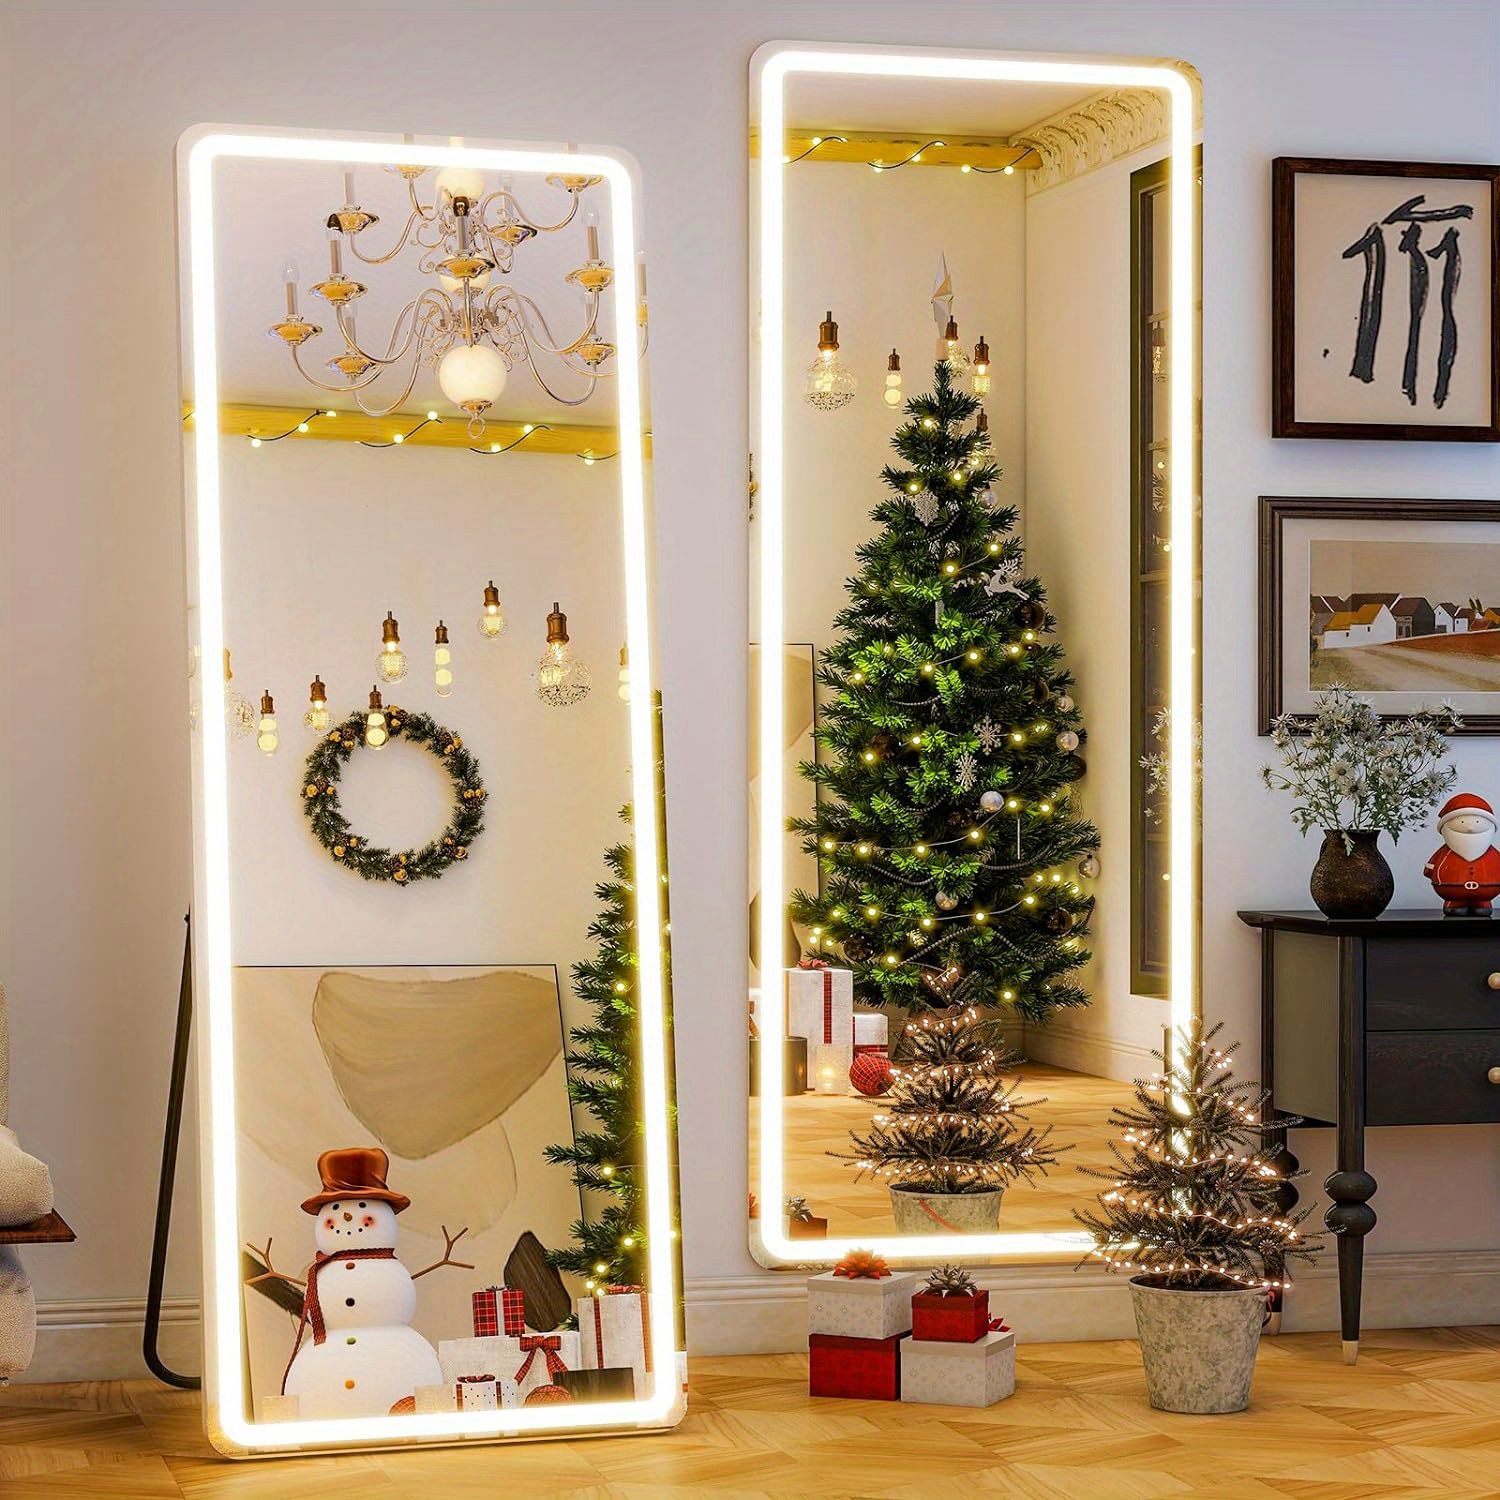 

Led Full Length Mirror Full Body Mirror With Stand Wall Mounted Hanging Mirror With Lights Free Standing Floor Mirror For Bedroom, White